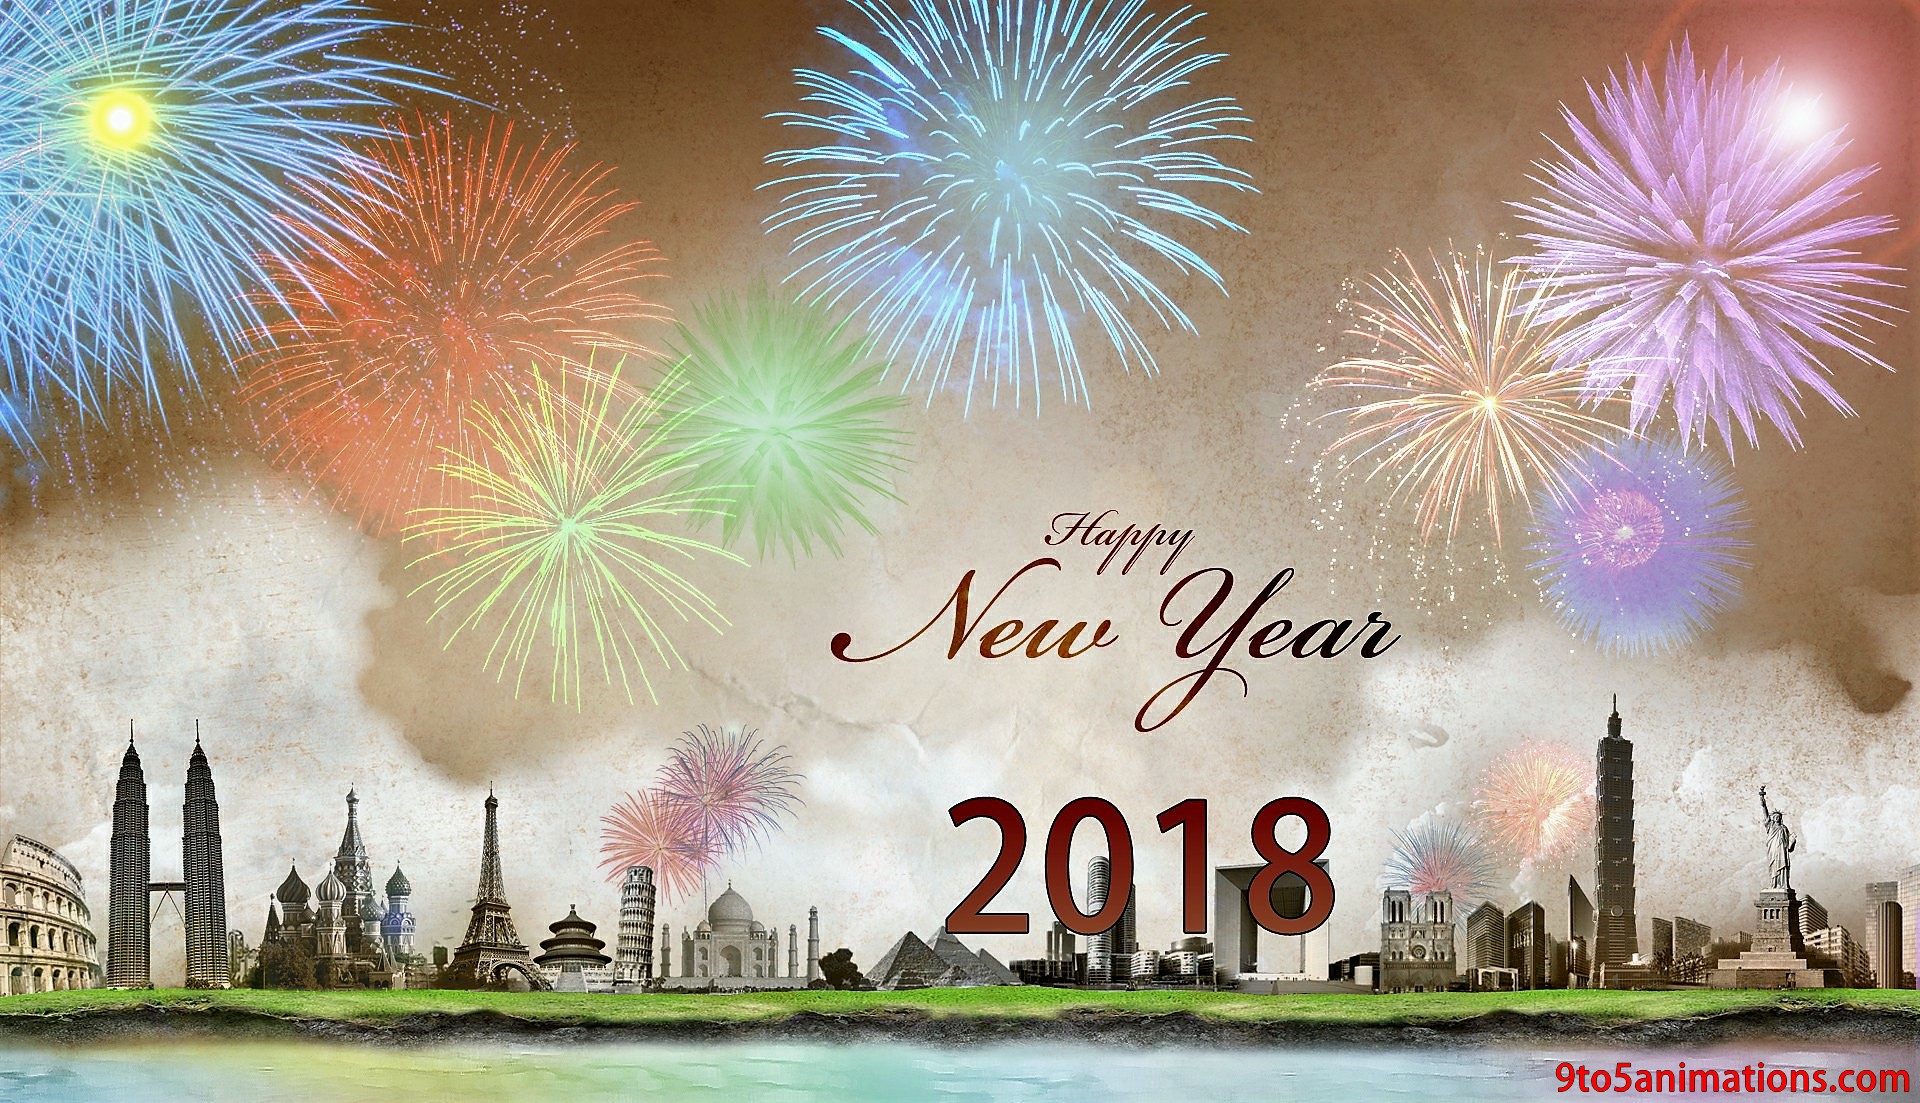 Happy New Year Wallpaper High Definition